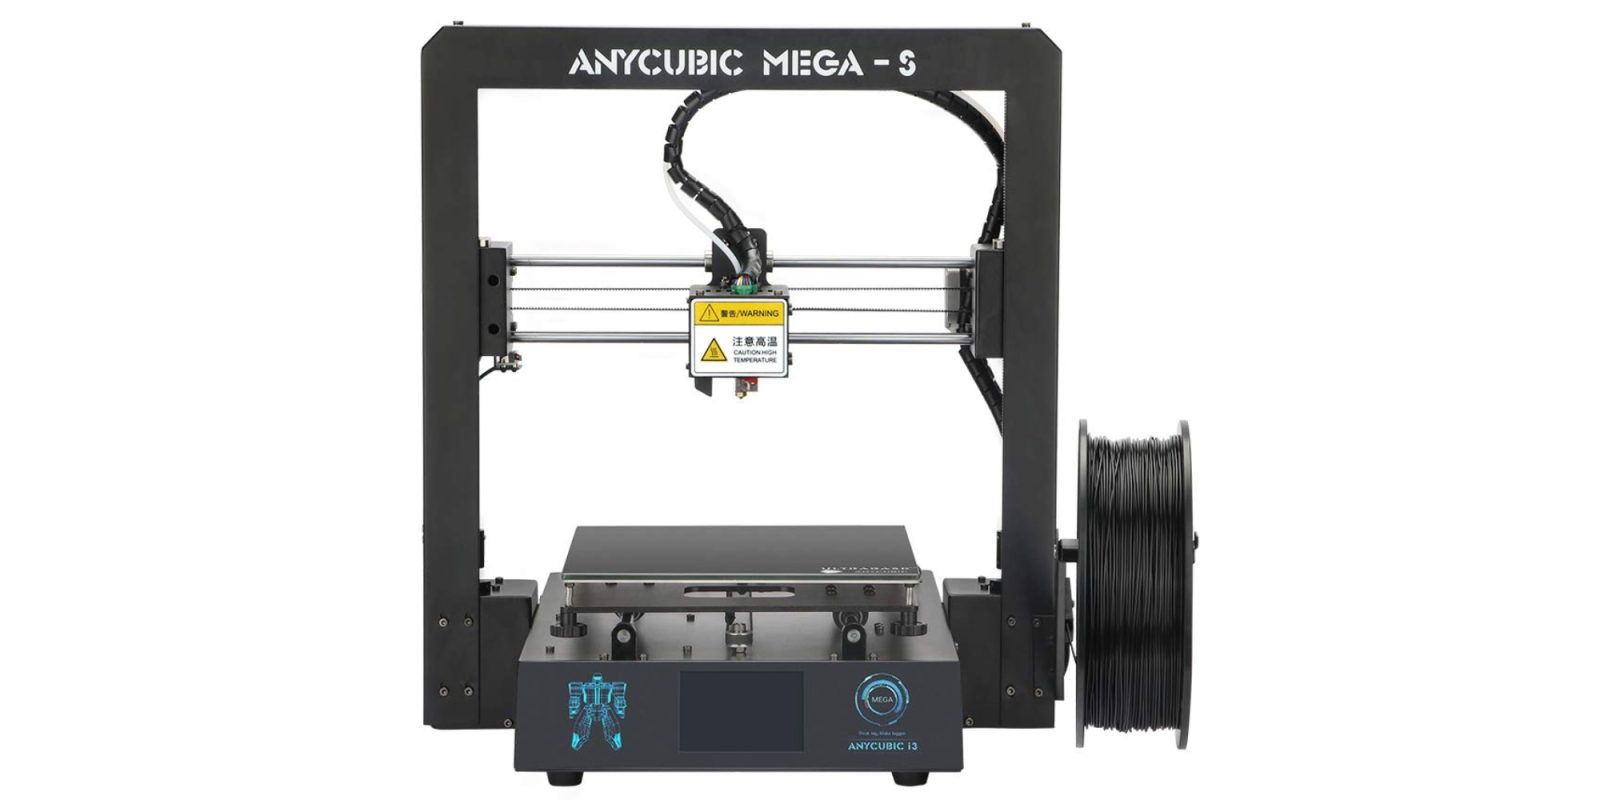 Save $120 on ANYCUBIC's Mega-S 3D Printer at a new 2020 low of $250